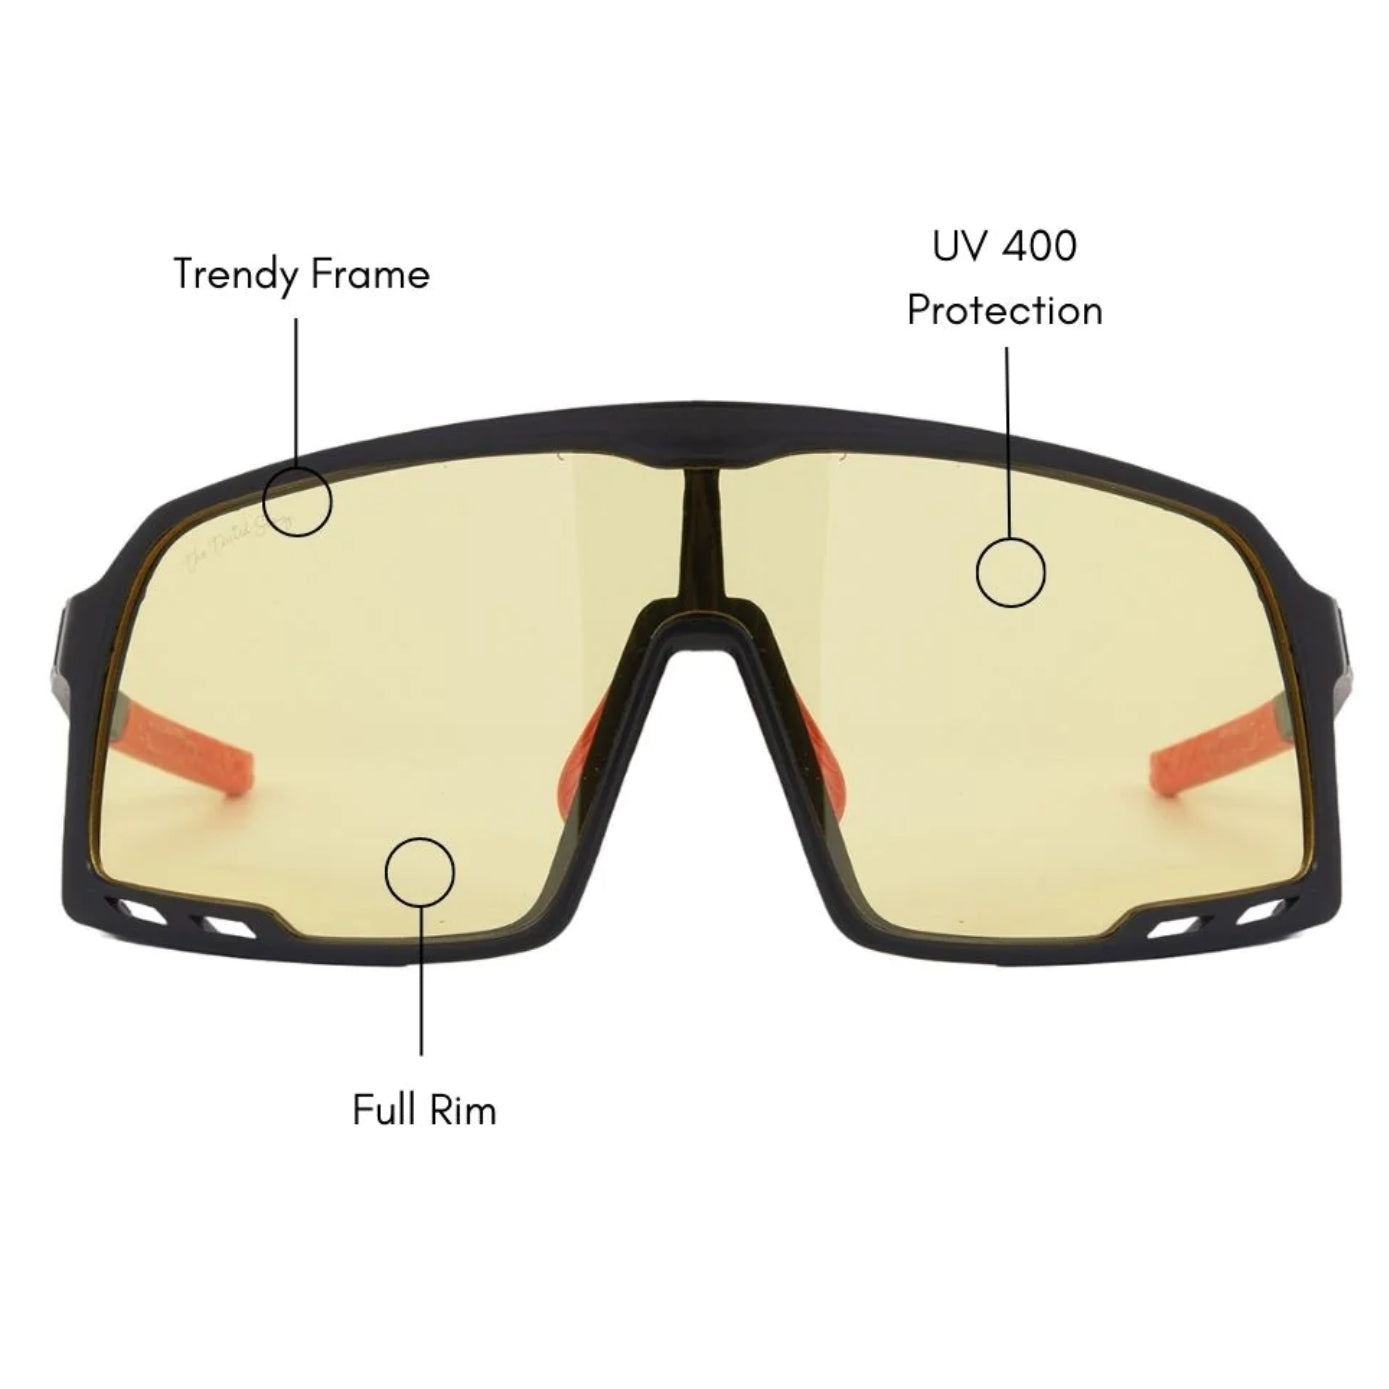 Fly - Allround Sports Sunglass with UV 400 Protection